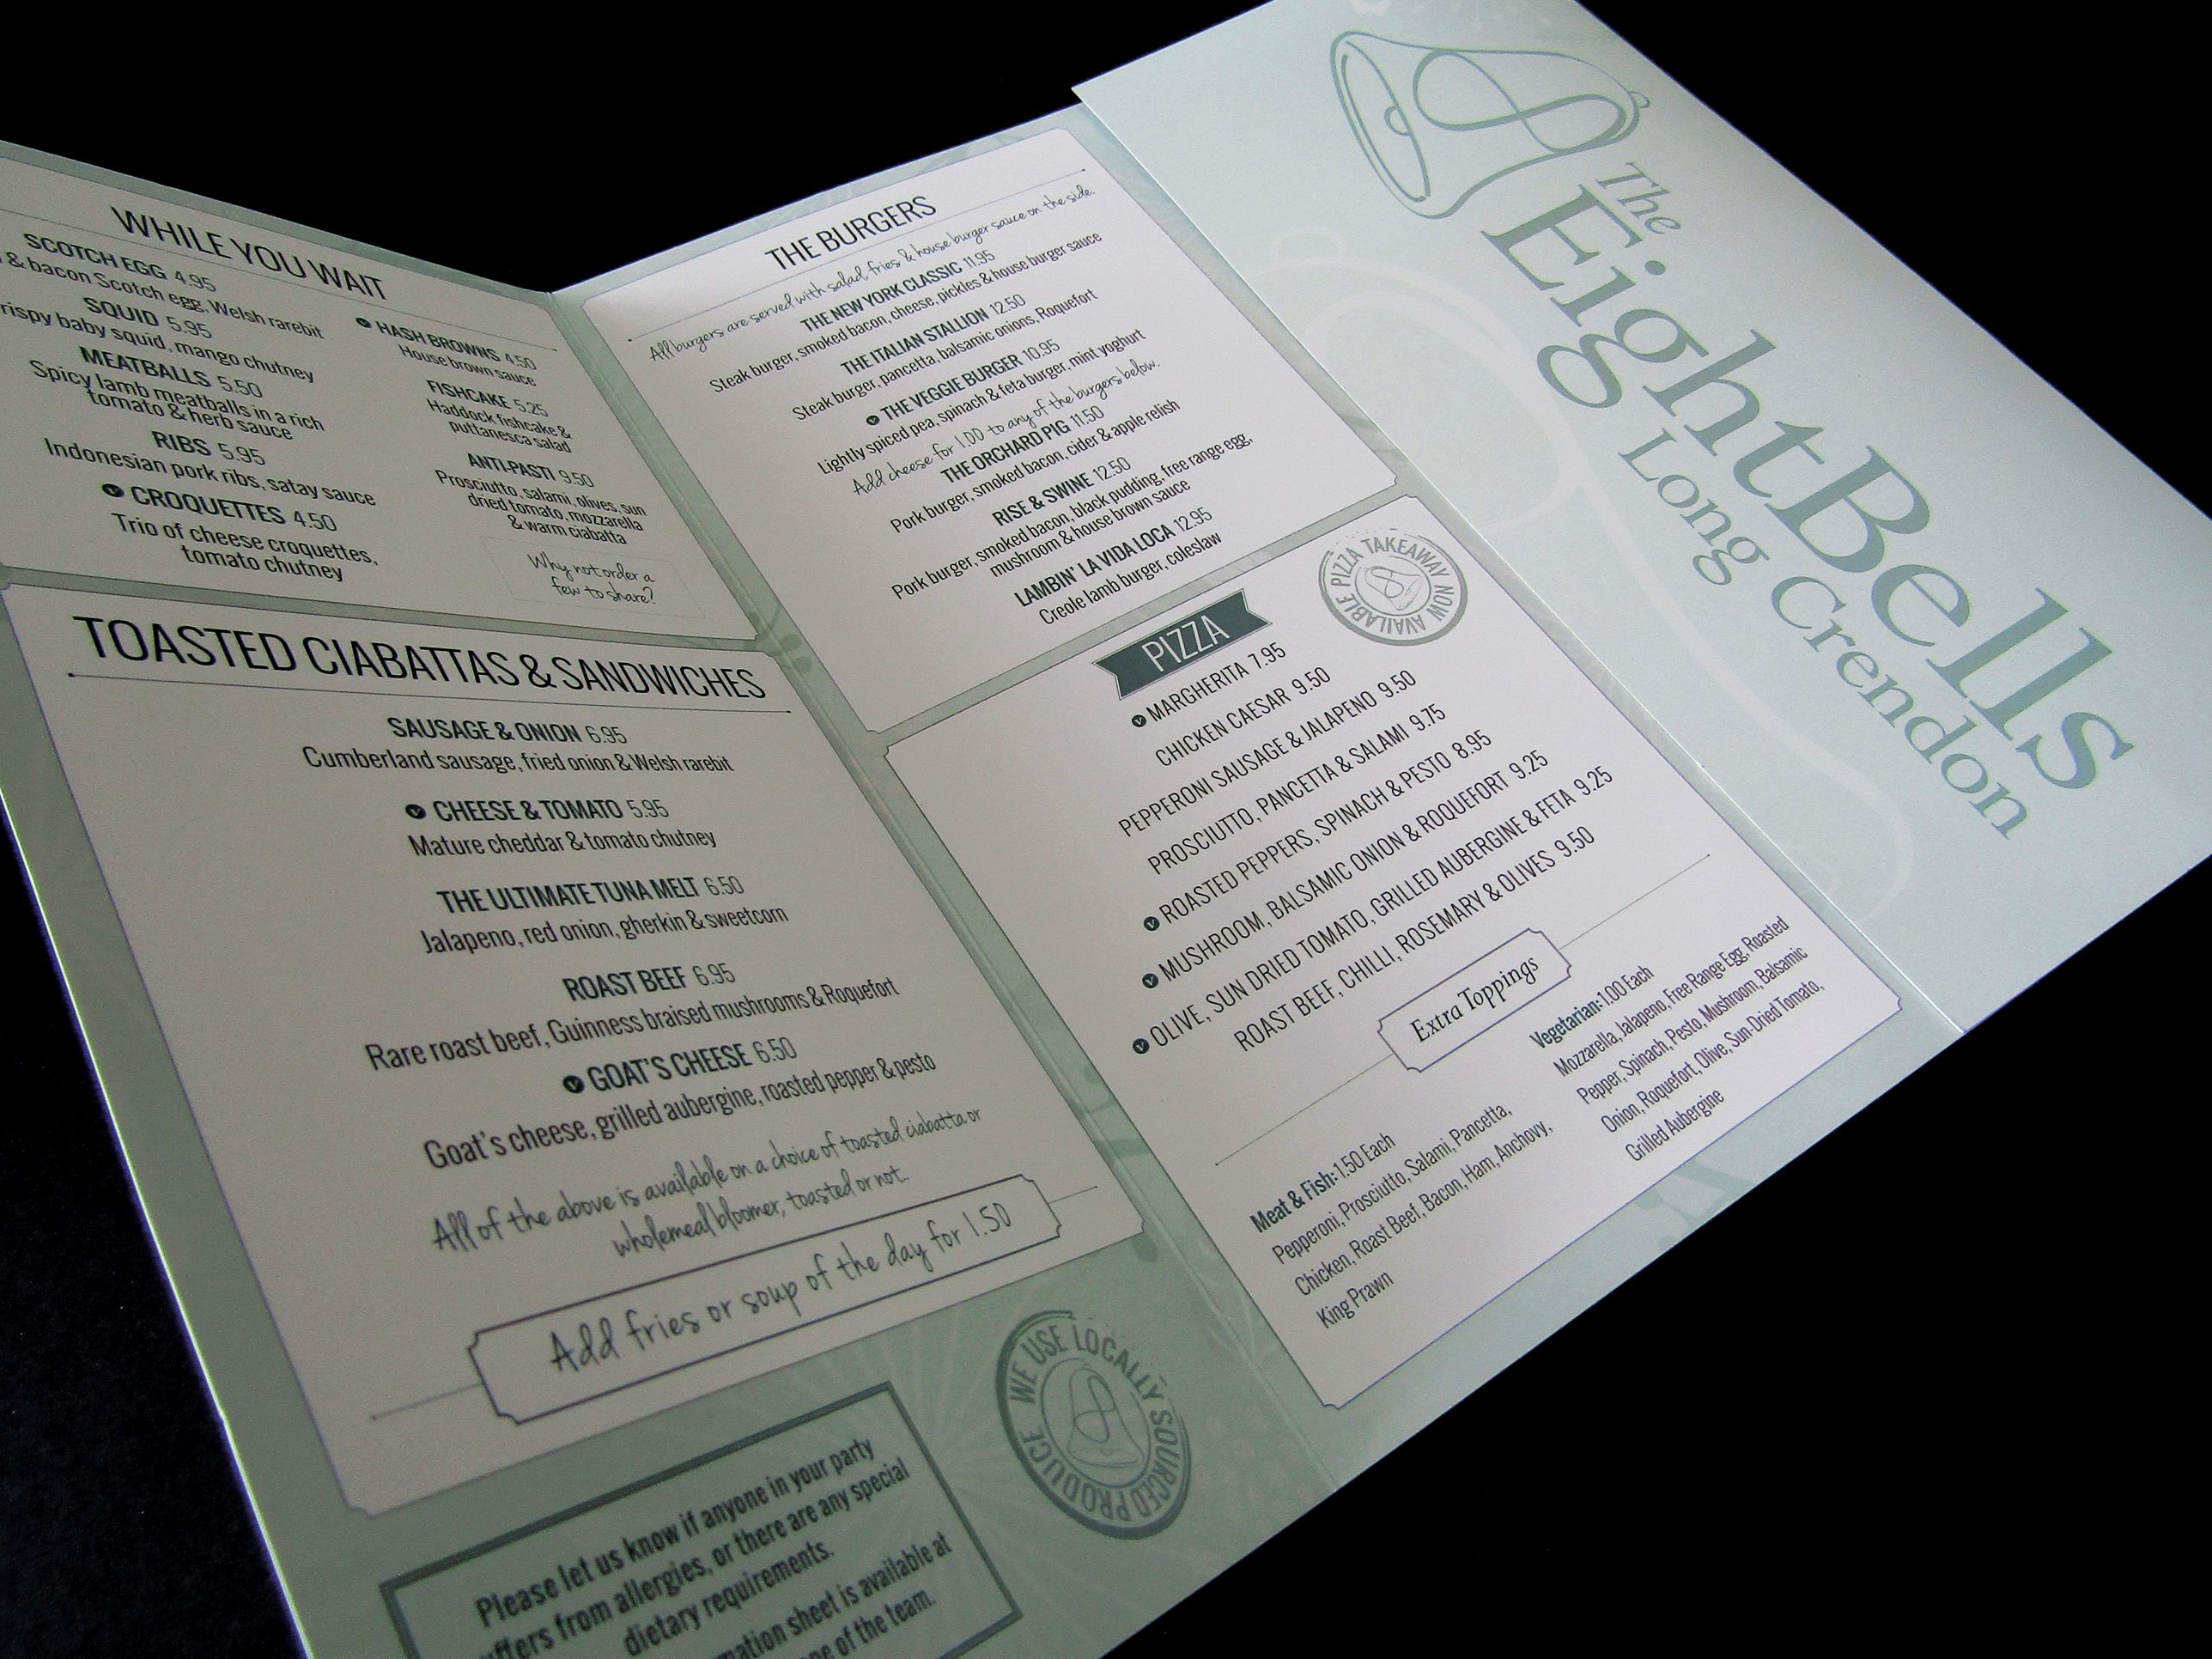  Pub menu design and print– Pub and restaurant branding and website design by shared creative Aylesbury